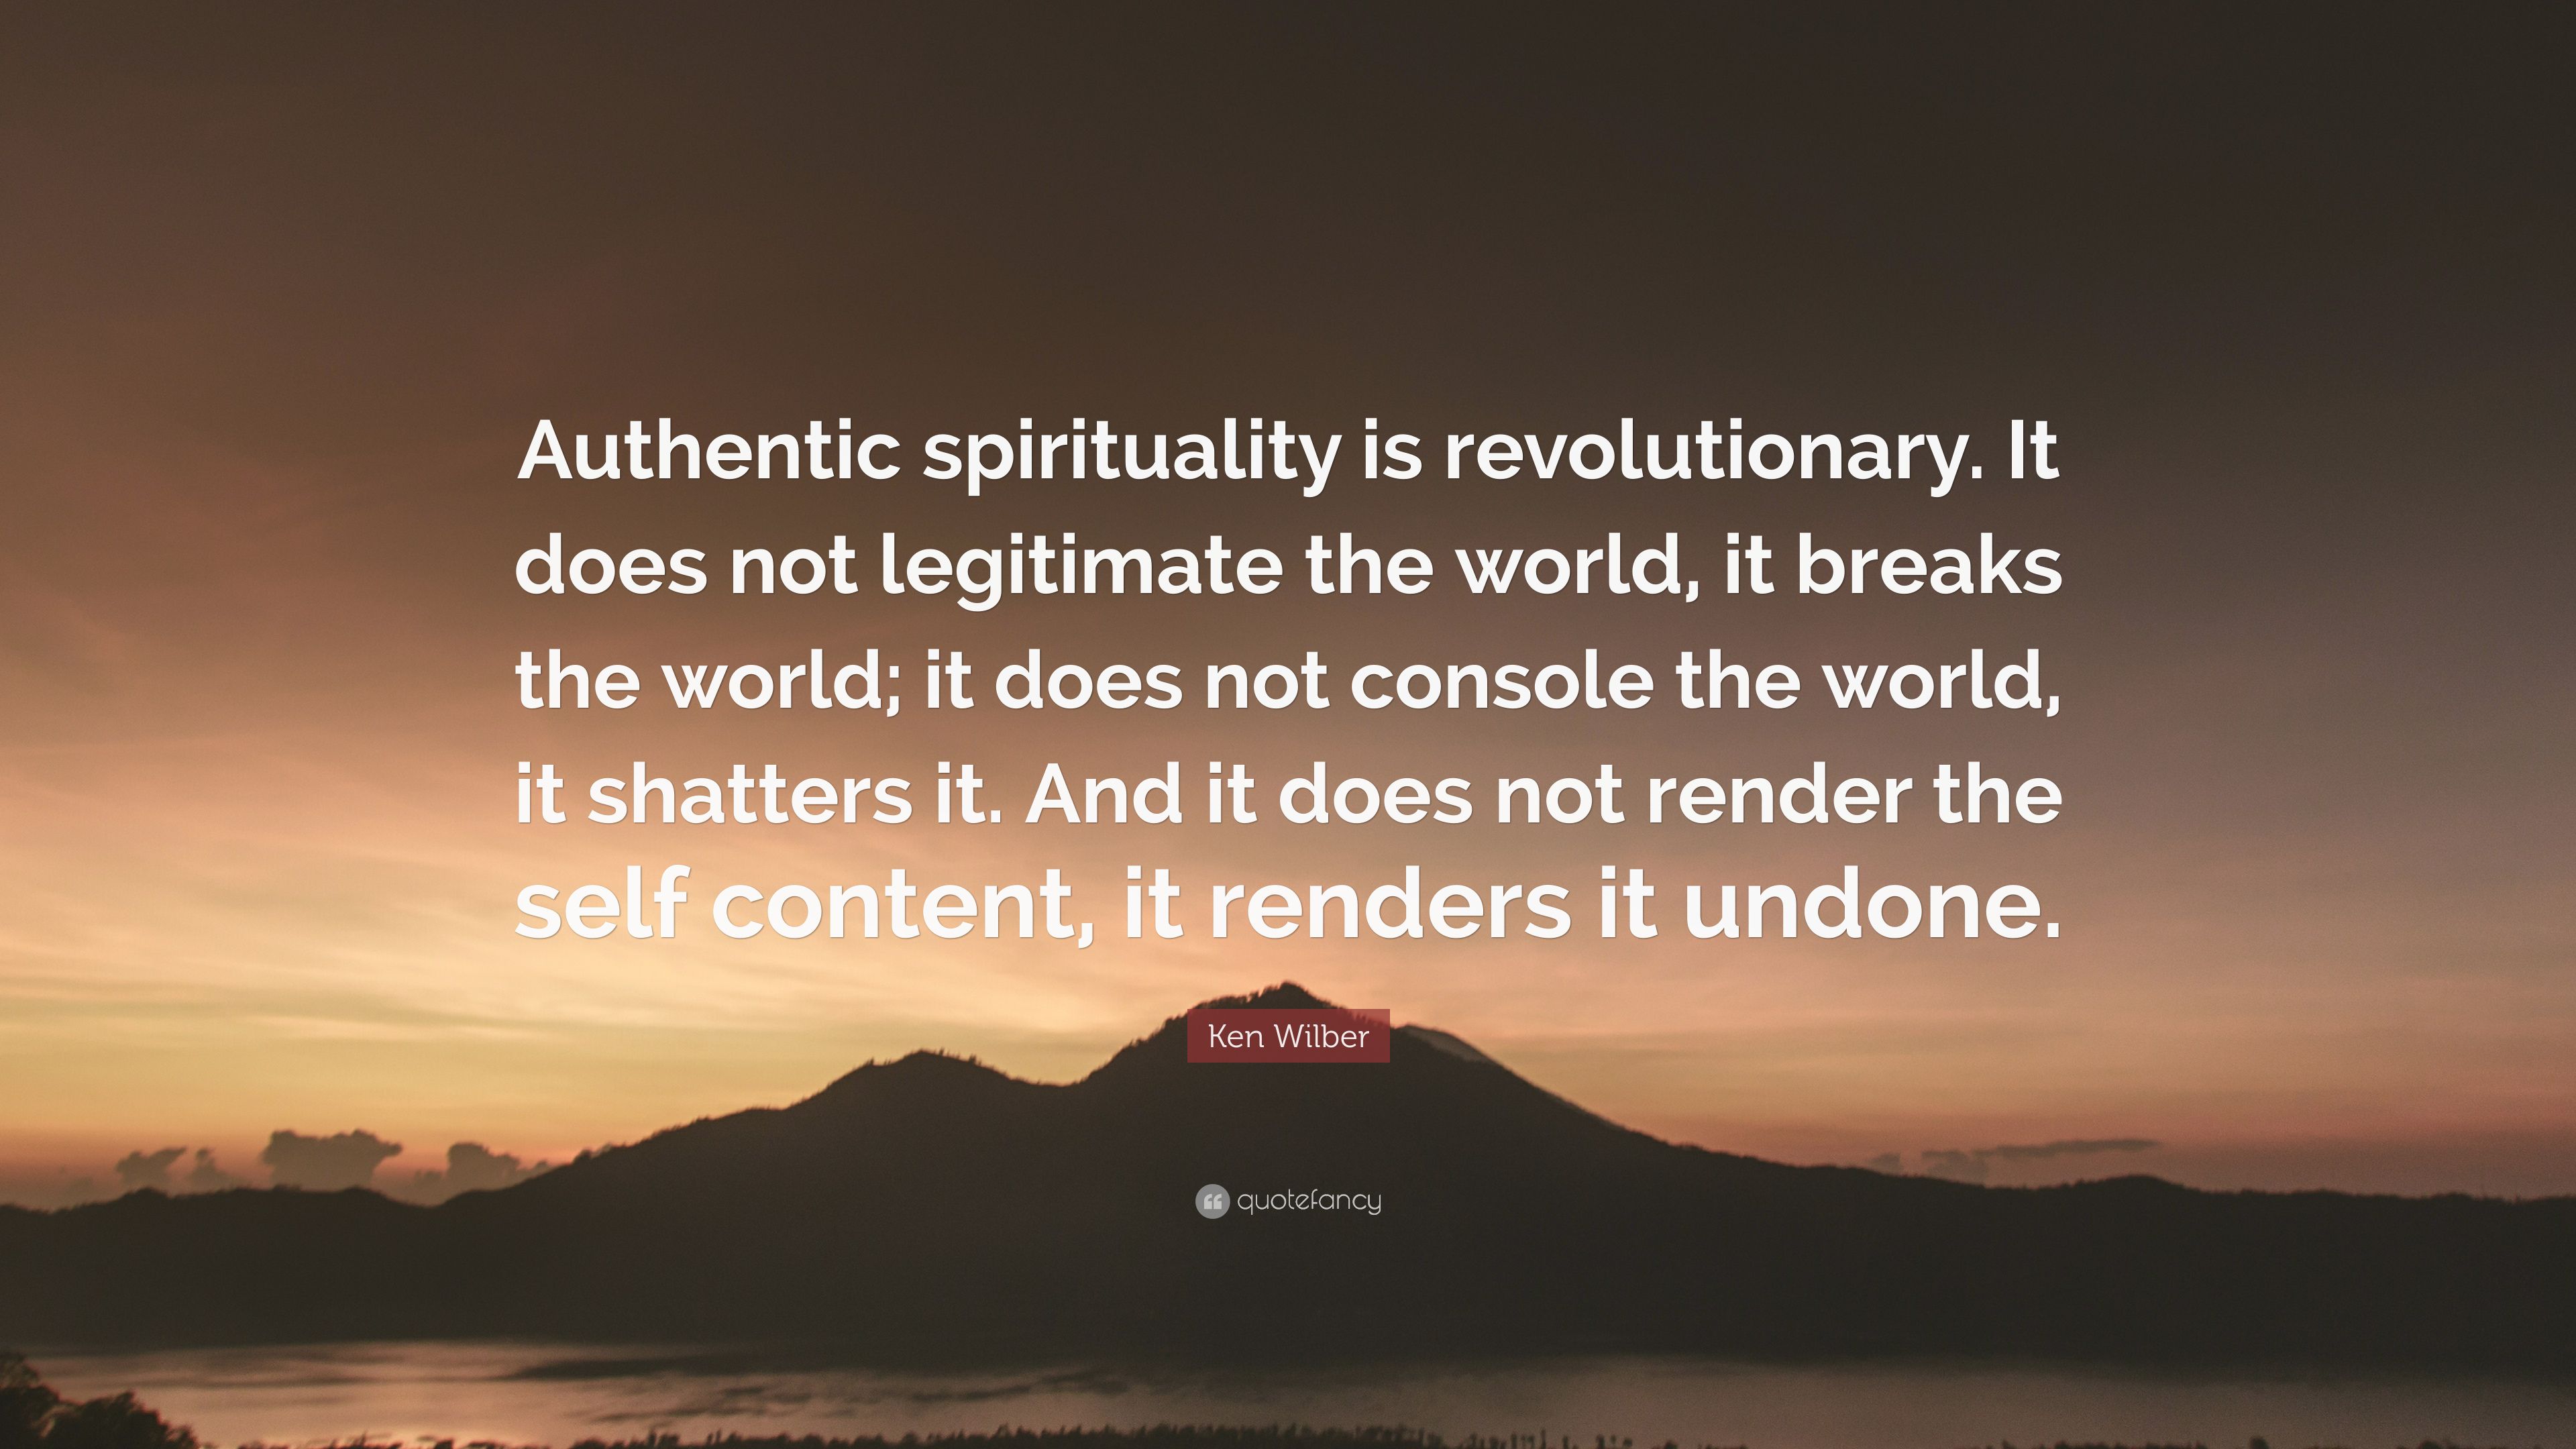 Ken Wilber Quote: “Authentic spirituality is revolutionary. It